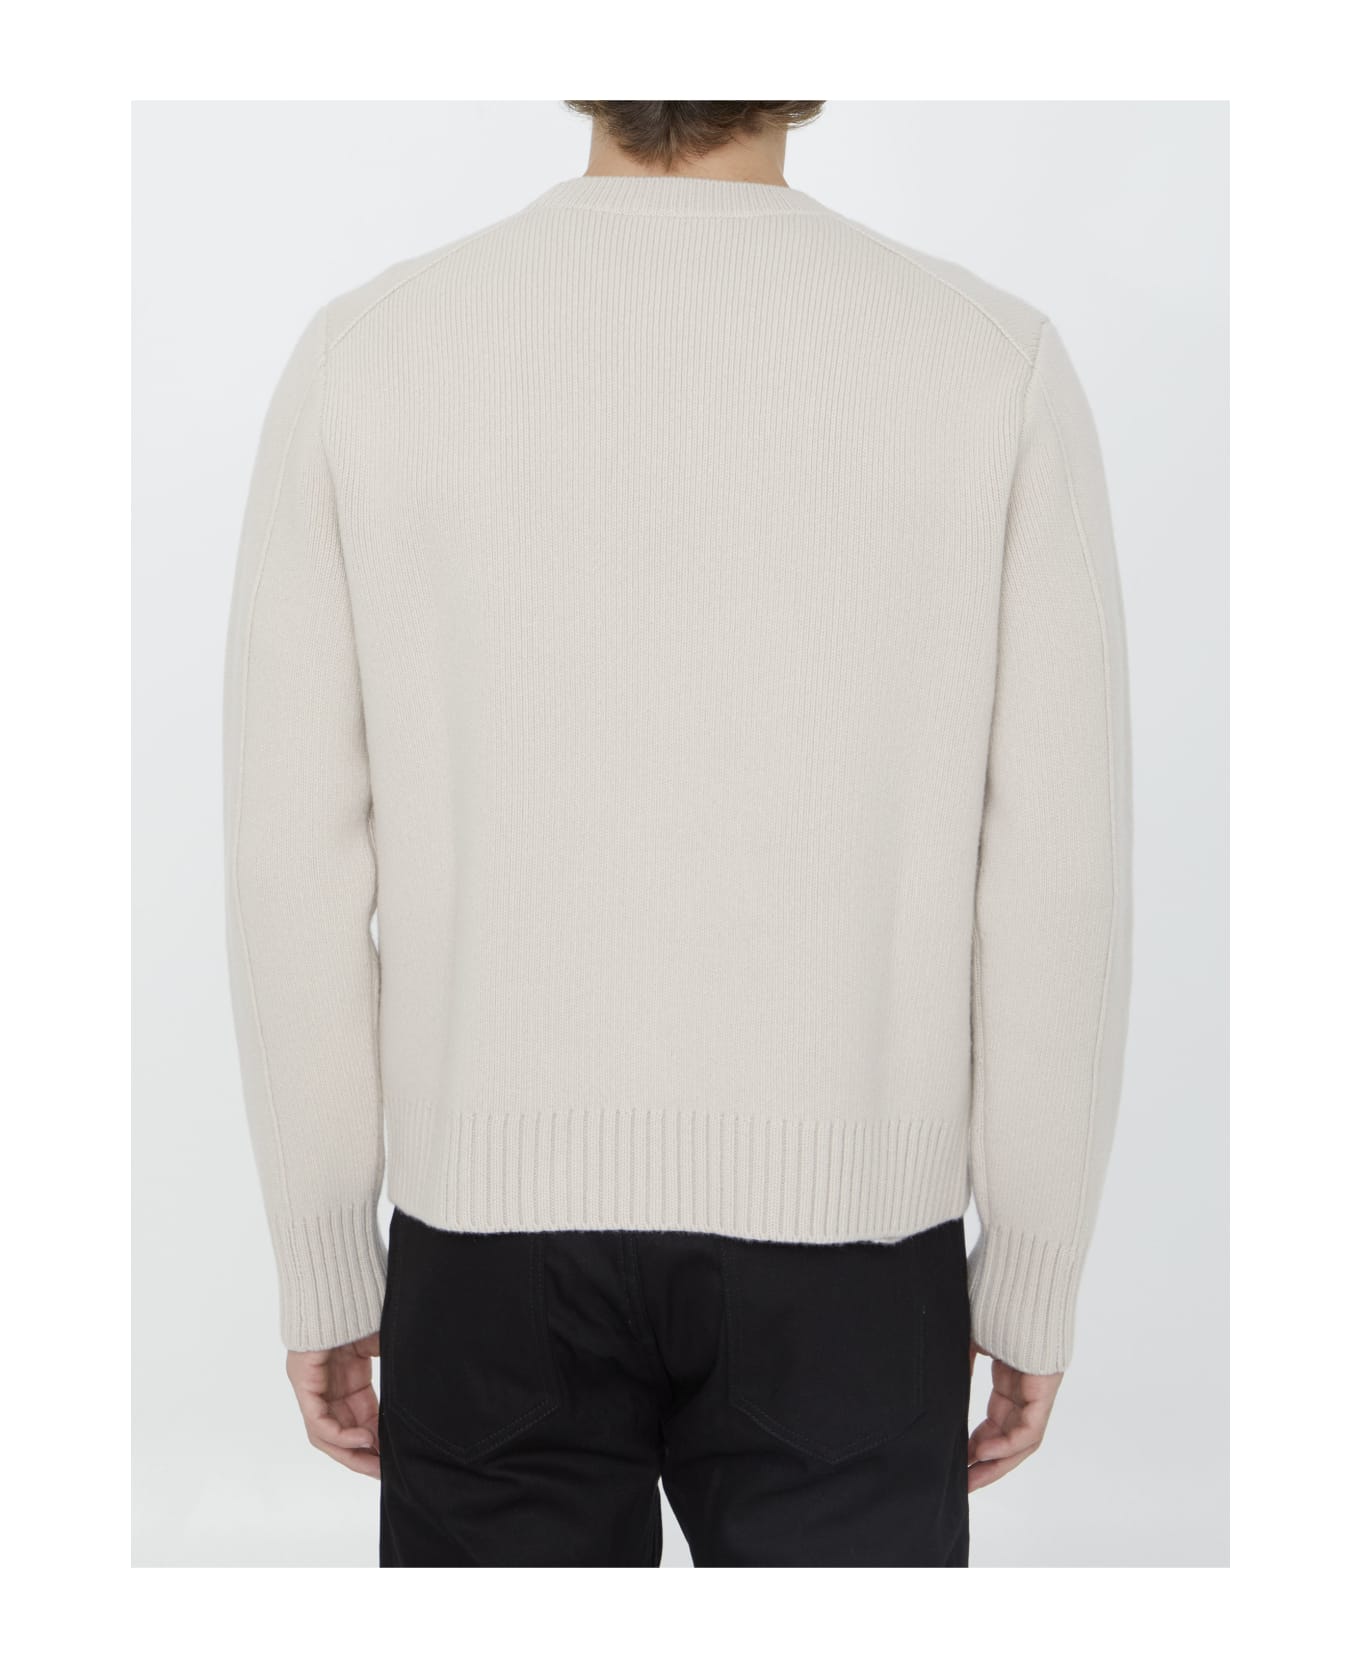 Lanvin Wool And Cashmere Sweater - CREAM ニットウェア